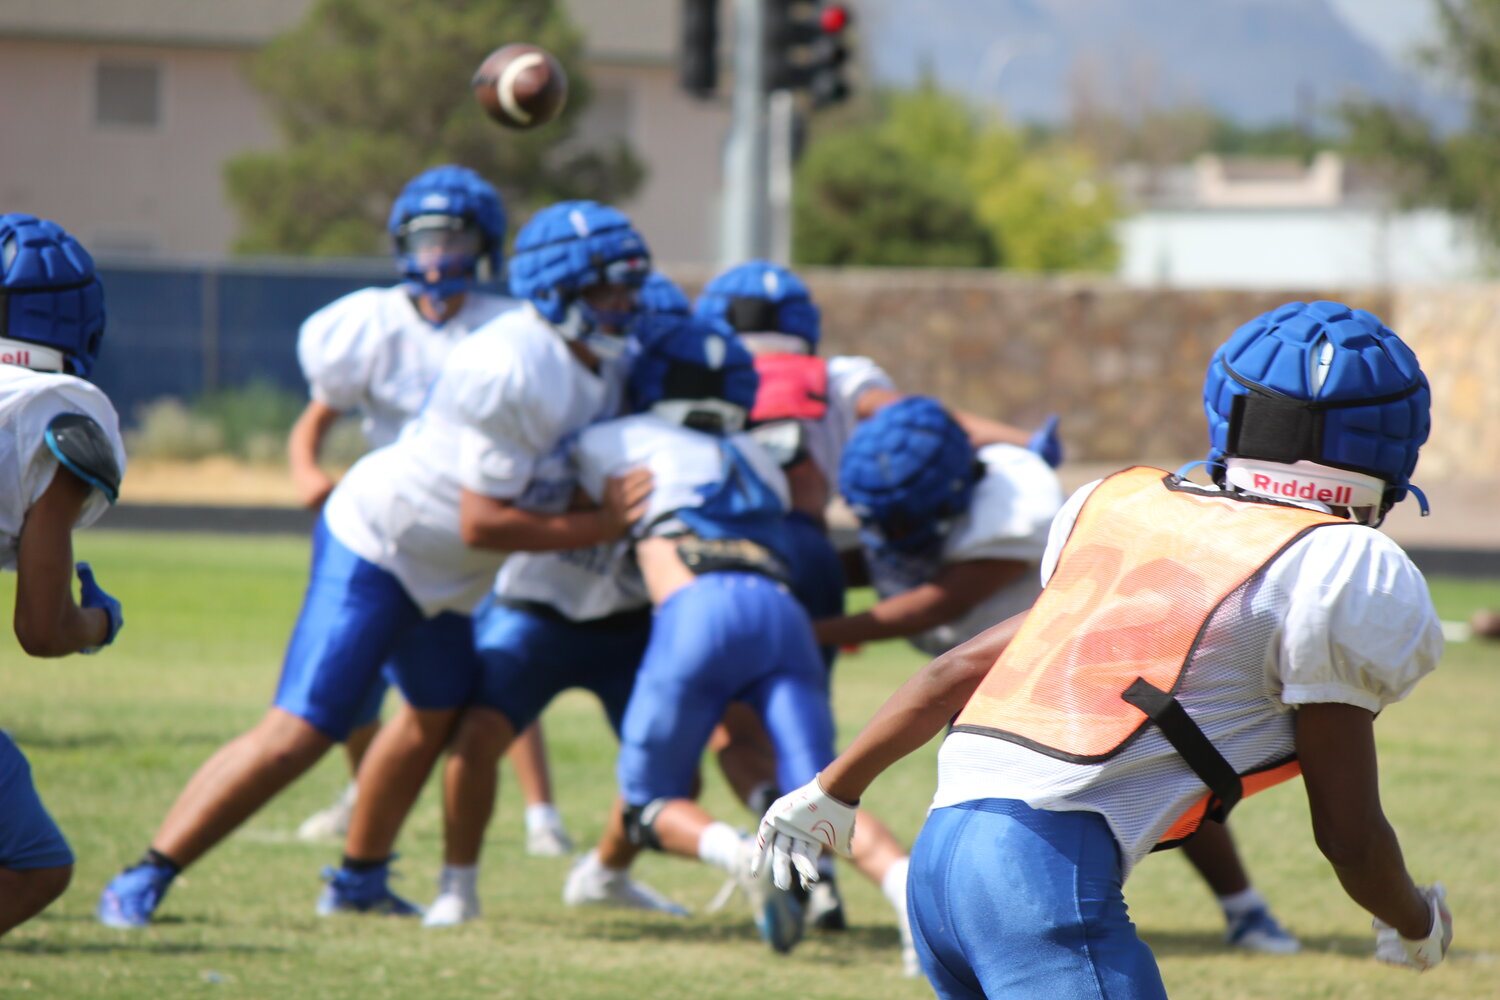 Las Cruces High School practiced Monday, Aug. 14, in preparation for their opening game 7 p.m. Friday, Aug. 19, at the Field of Dreams against Volcano Vista. LCHS had a rare down year last year, finishing 2-7, but 8th-year Head Coach Mark Lopez is hoping the Bulldawgs return to the form of 2021, when they made the state semifinals. The Bulldawgs are ranked No. 8 in Class 6A heading into the season. The annual LCHS-Mayfield rivalry game this year is 7 p.m. Friday, Sept. 15, and District 6A-3/4 play begins the following week on Sept. 22.